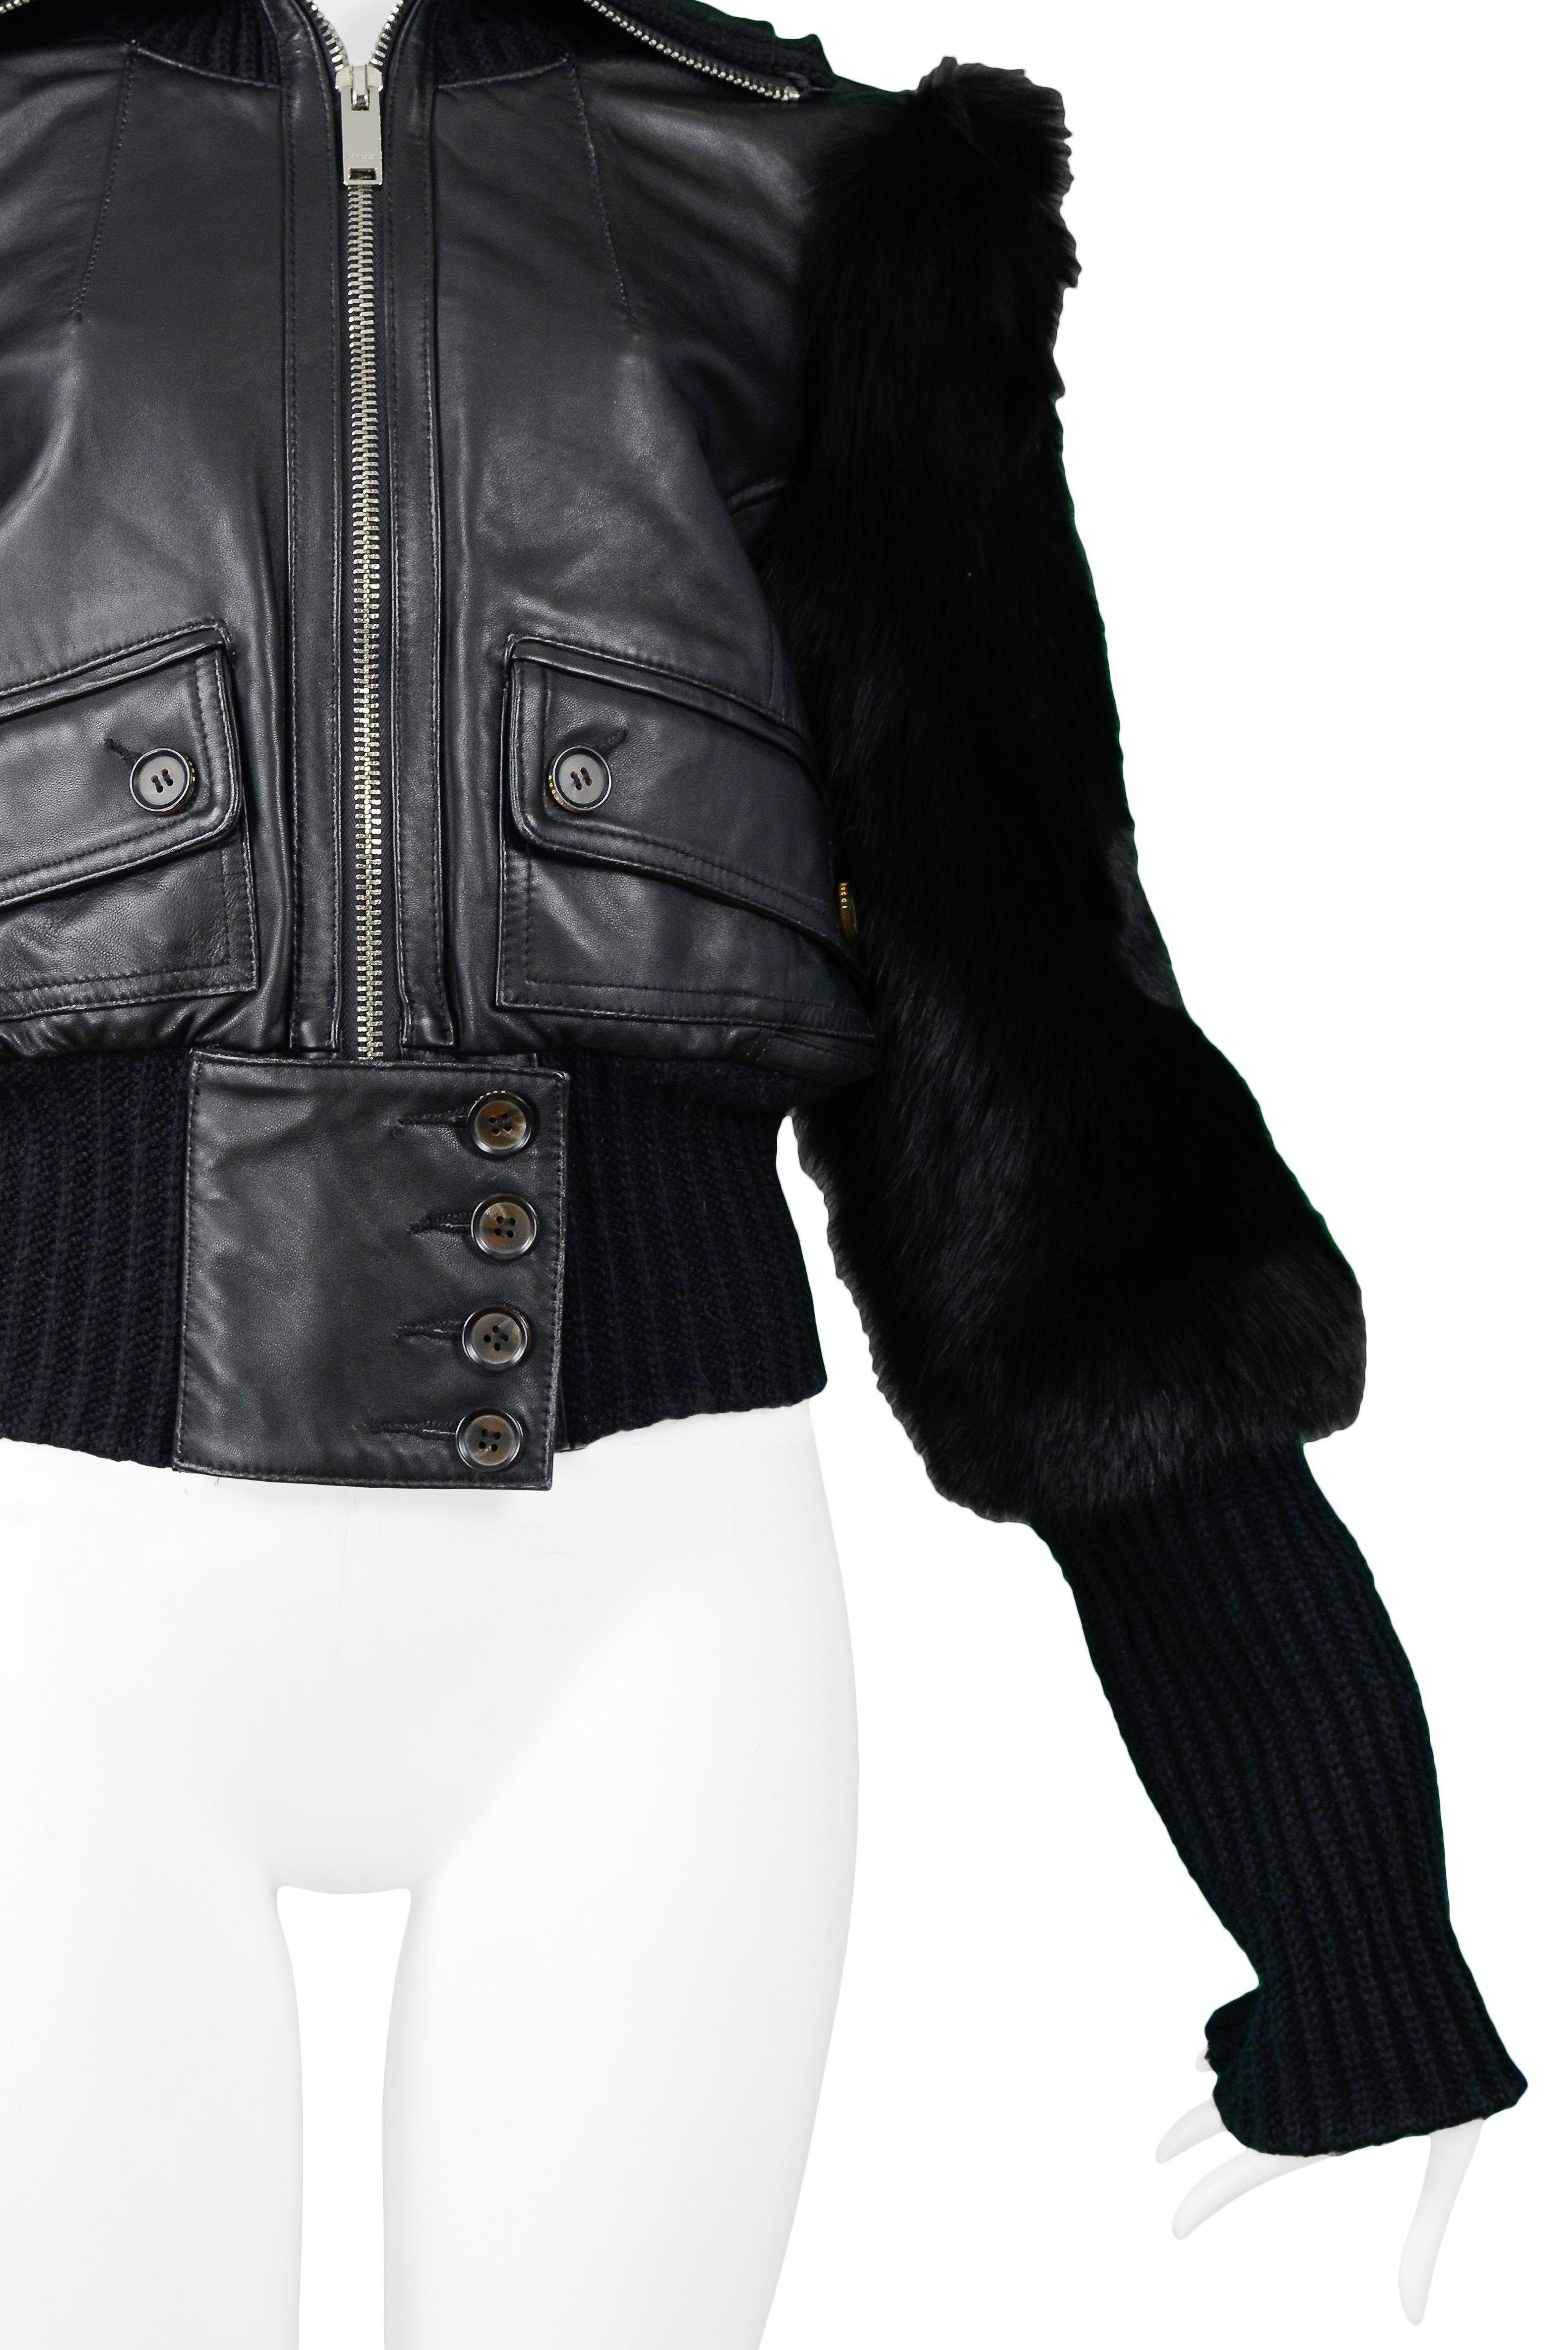 Women's Gucci By Tom Ford Leather & Fox Fur Jacket 2003 For Sale